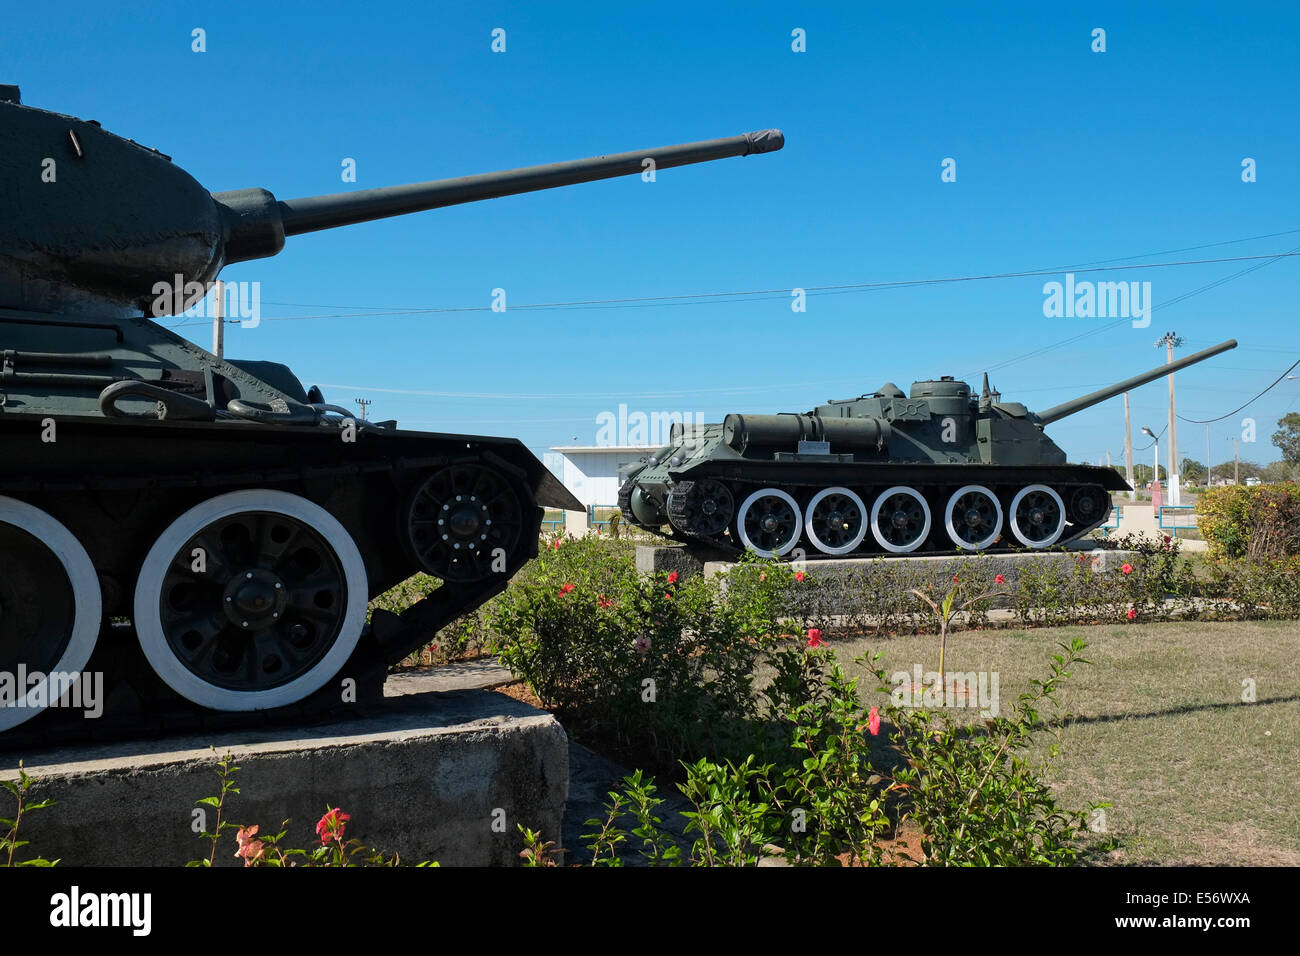 T34 and SAU-100 tanks at the Bay of Pigs Museum, Playa Giron, Cuba. Stock Photo